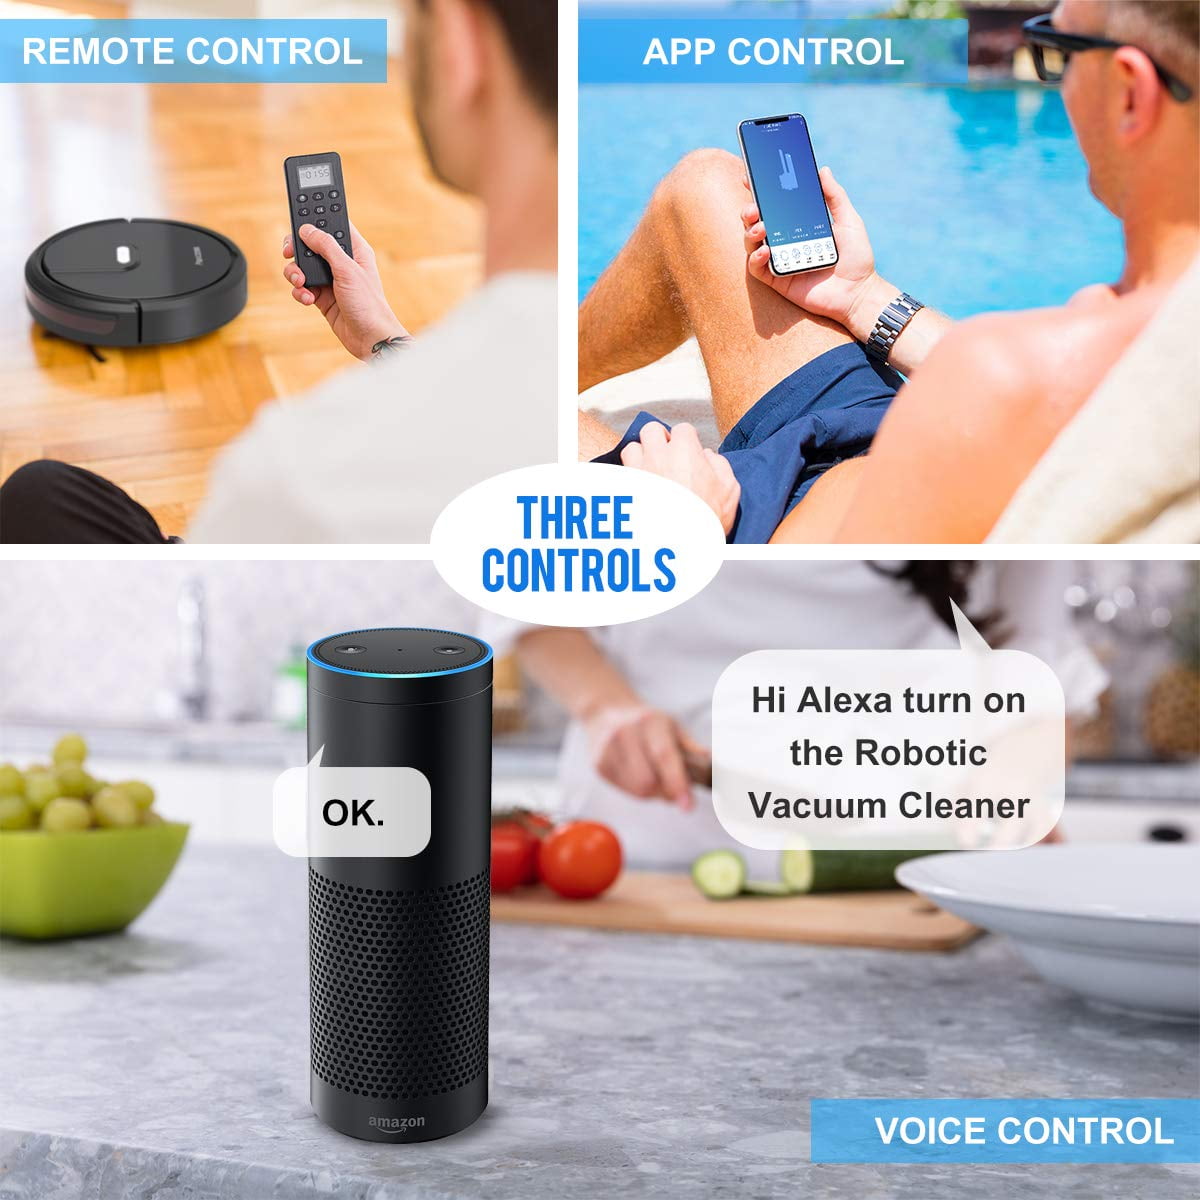 Remote & App Control 120 Min Run Time Compatible with Alexa Super Quiet Self-Charging Automatic Smart Robot Vacuum Wi-Fi Connected with 1800Pa Powerful Suction PAXCESS Robotic Vacuum Cleaner 